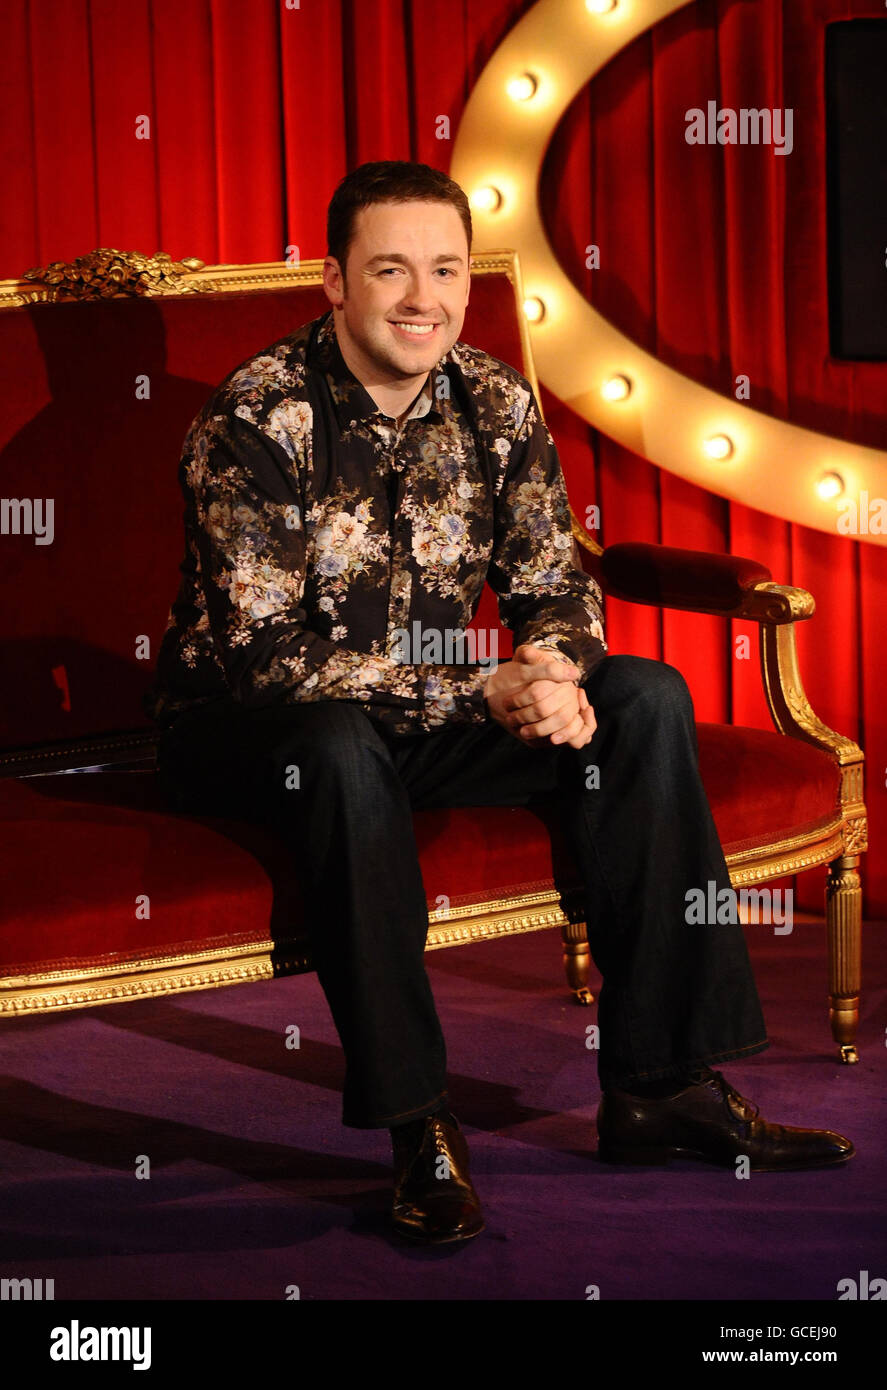 Comedian Jason Manford on the television show, Justin Lee Collins Good Times, filmed at the Rivoli Ballroom in London. The episode will be transmitted at 2200 on Channel 5, on Monday 19th April, 2010. Stock Photo